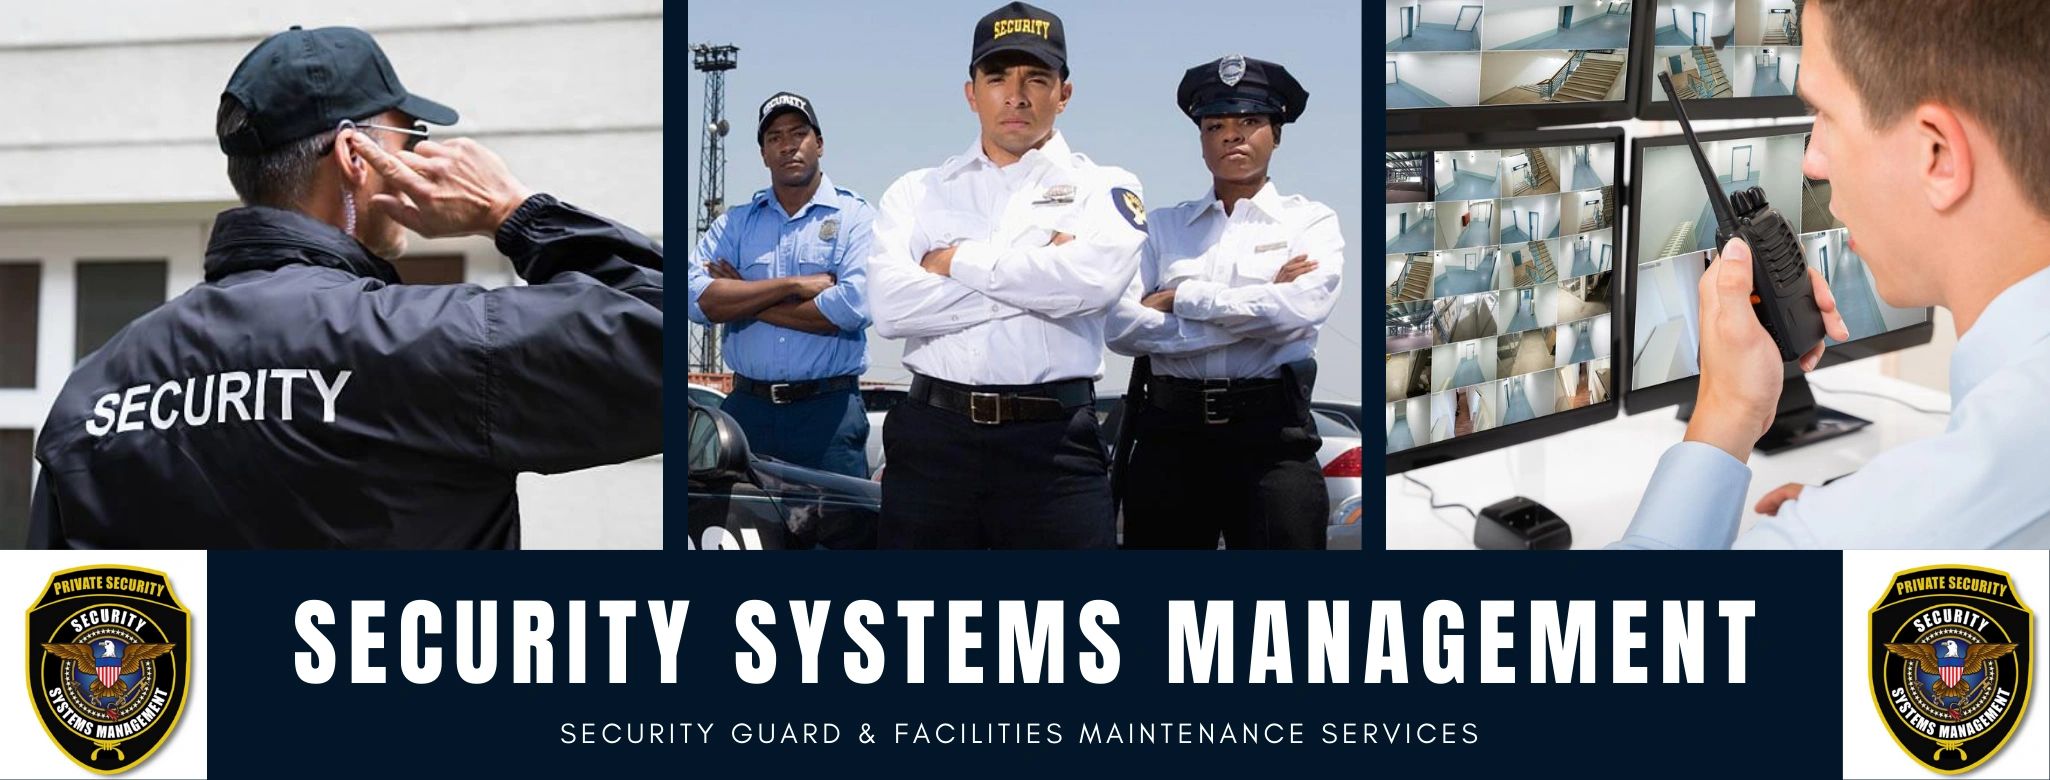 Security Services New York City